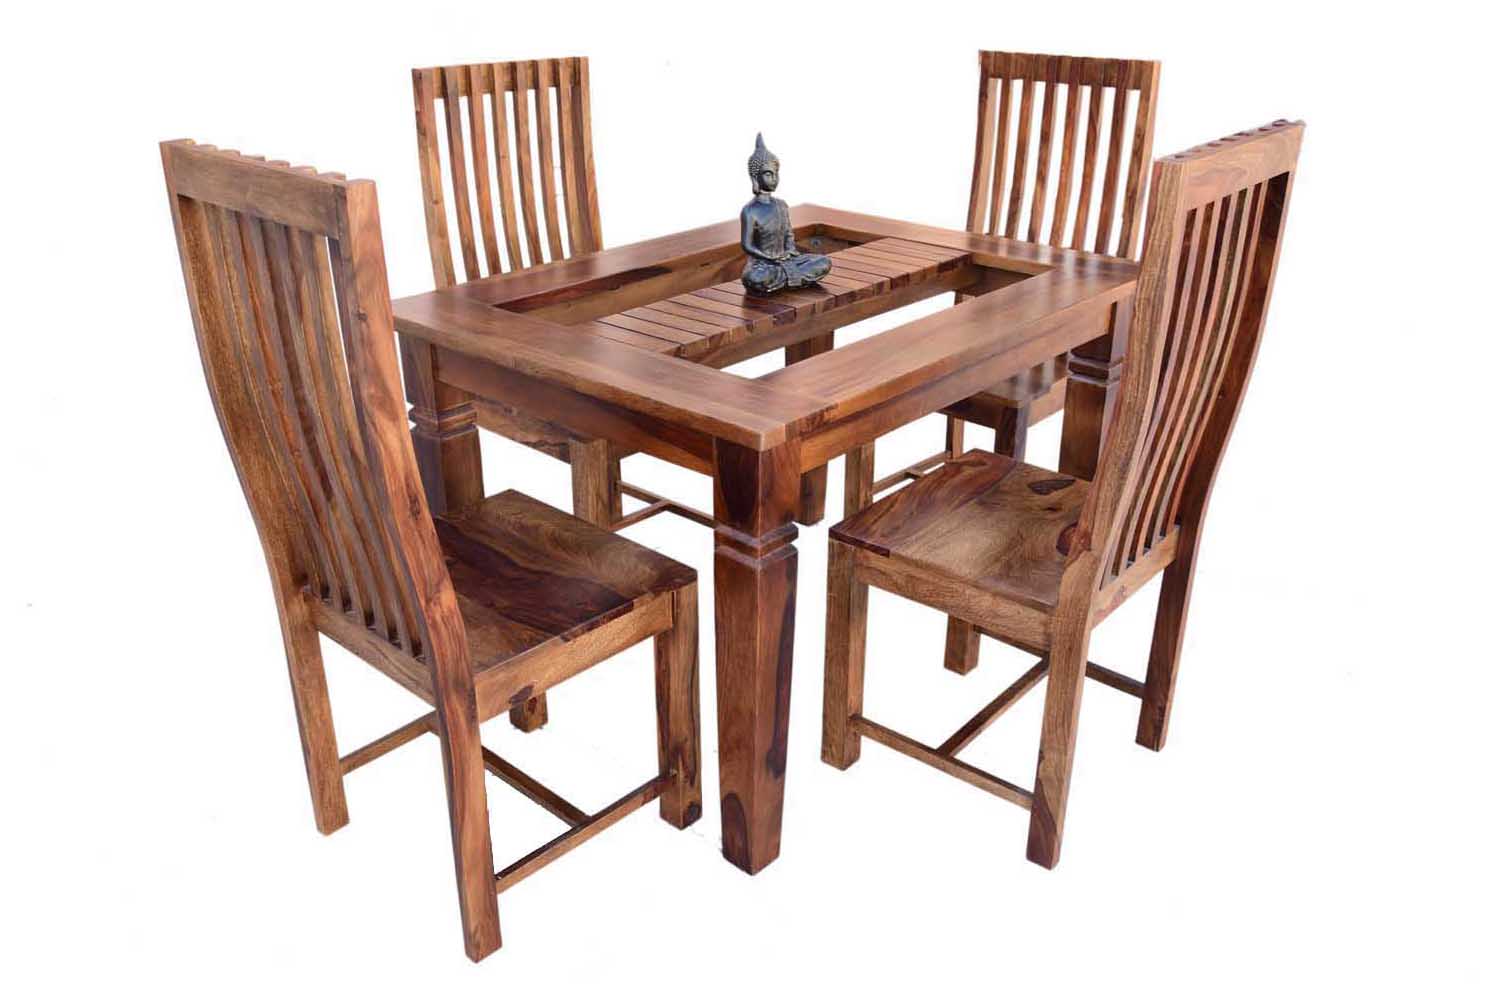 Buy 4-Seater swingo dining table with zernal wooden chair | Dining Room